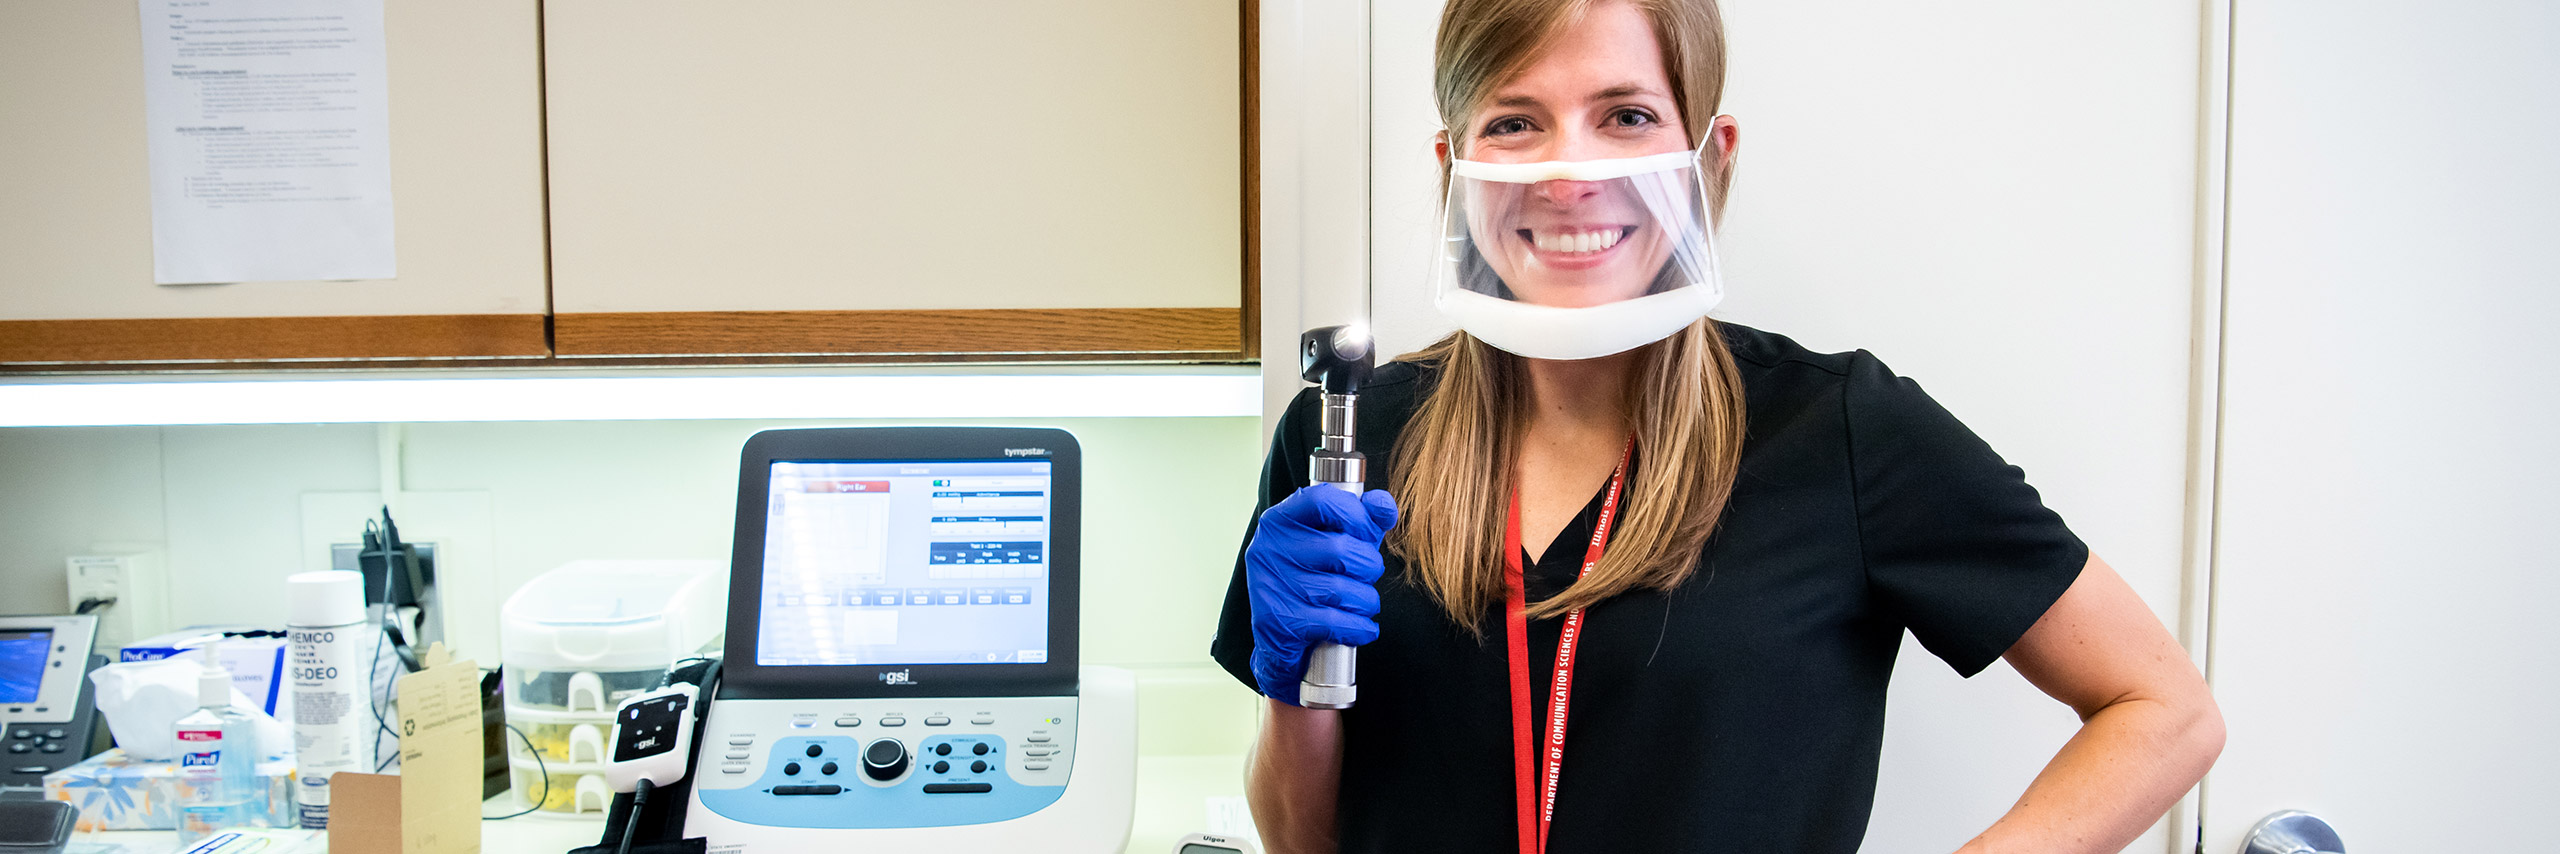 Female researcher utilizing medical equipment for communication science and disorder research in a clinical setting.